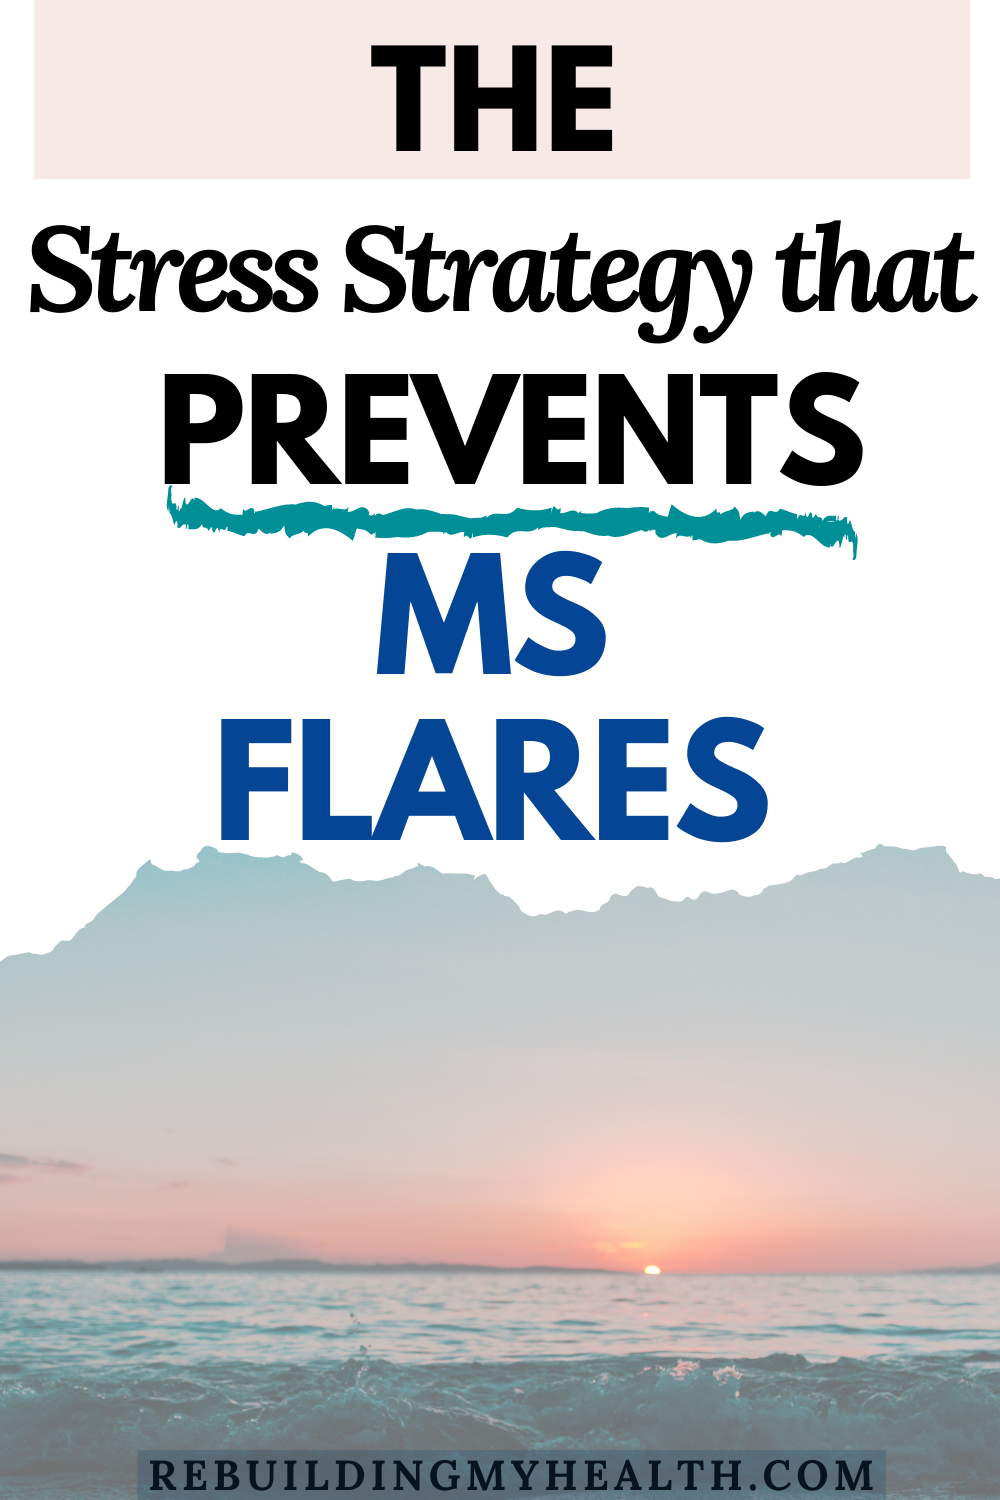 Along with exercise, breathing and meditation, Lisa turned to tapping for stress relief. Tapping regularly helps prevent MS flares.